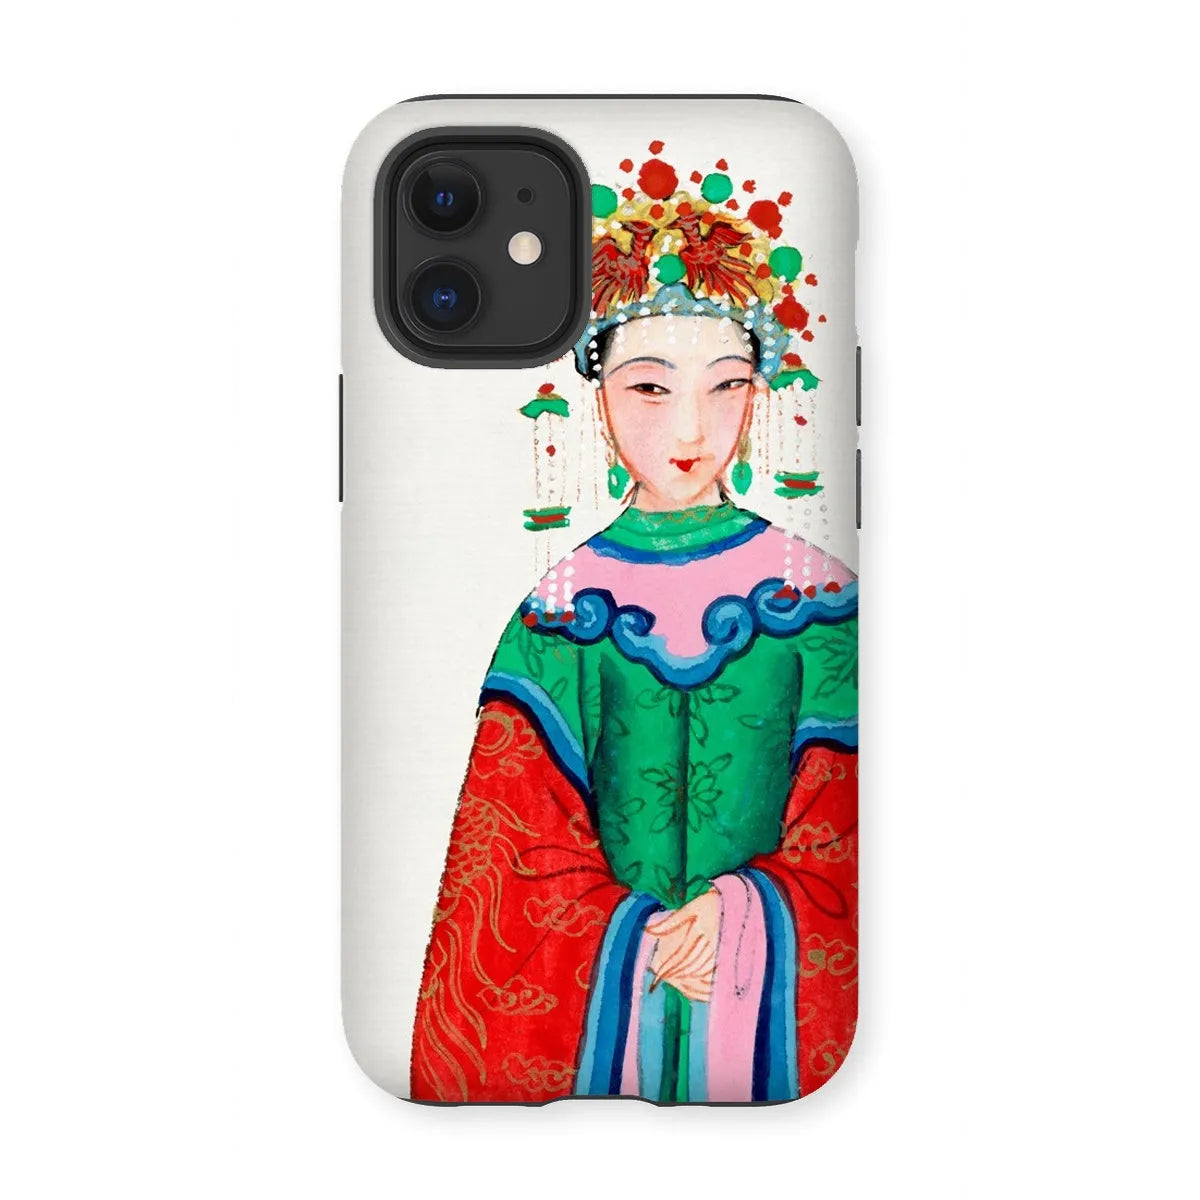 Imperial Princess - Chinese Aesthetic Painting Phone Case - Iphone 12 Mini / Matte - Mobile Phone Cases - Aesthetic Art